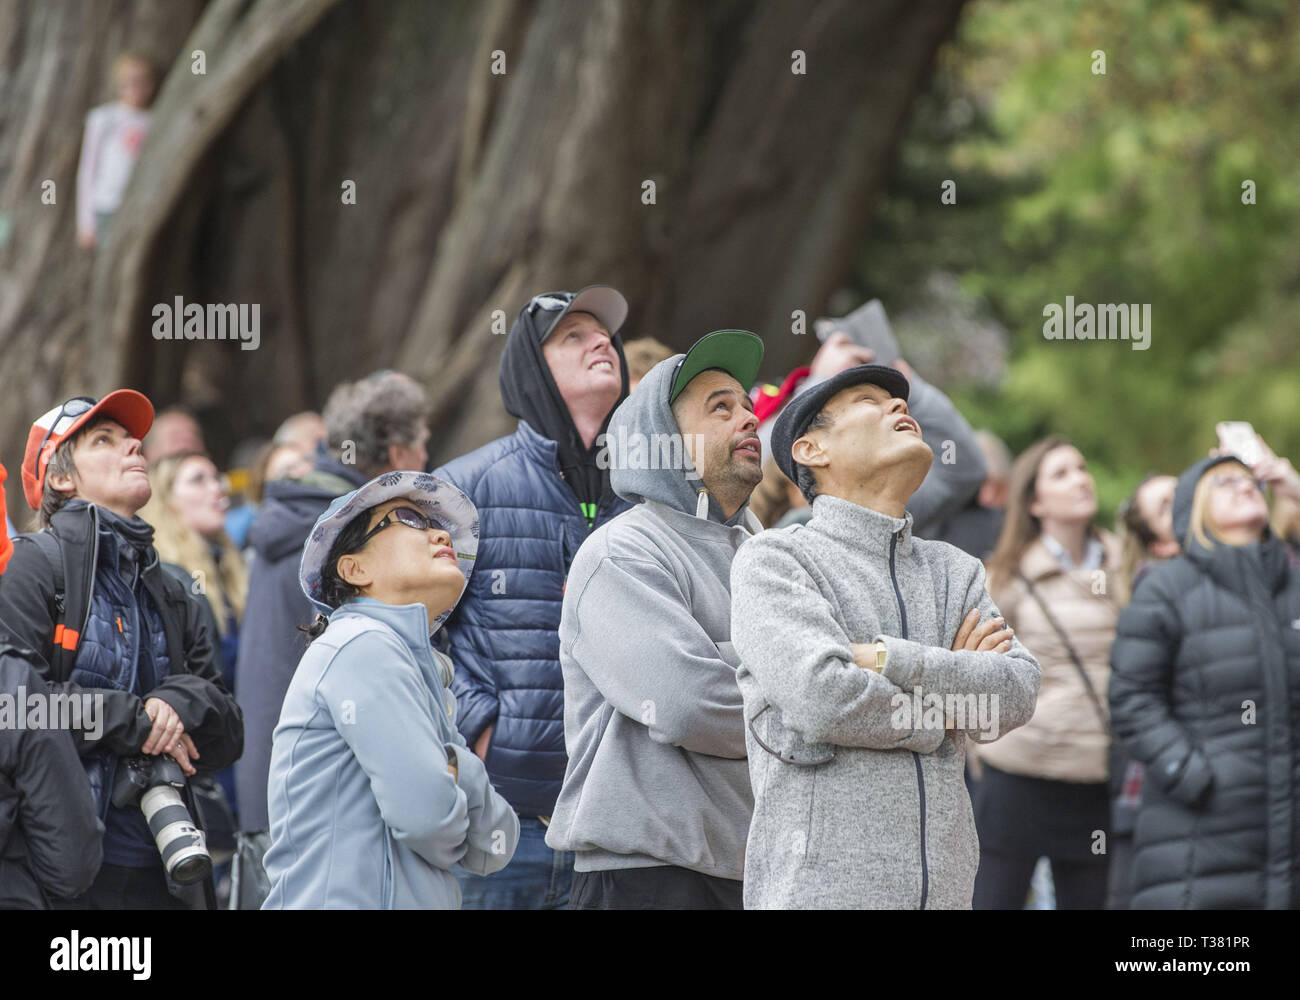 Christchurch, Canterbury, New Zealand. 7th Apr, 2019. Spectators crane their necks to watch participants in the Asia-Pacific Tree Climbing Masters' Challenge Championships in the Christchurch Botanic Gardens. Competitors vie in a series of tests of agility, speed and skill. Credit: PJ Heller/ZUMA Wire/Alamy Live News Stock Photo